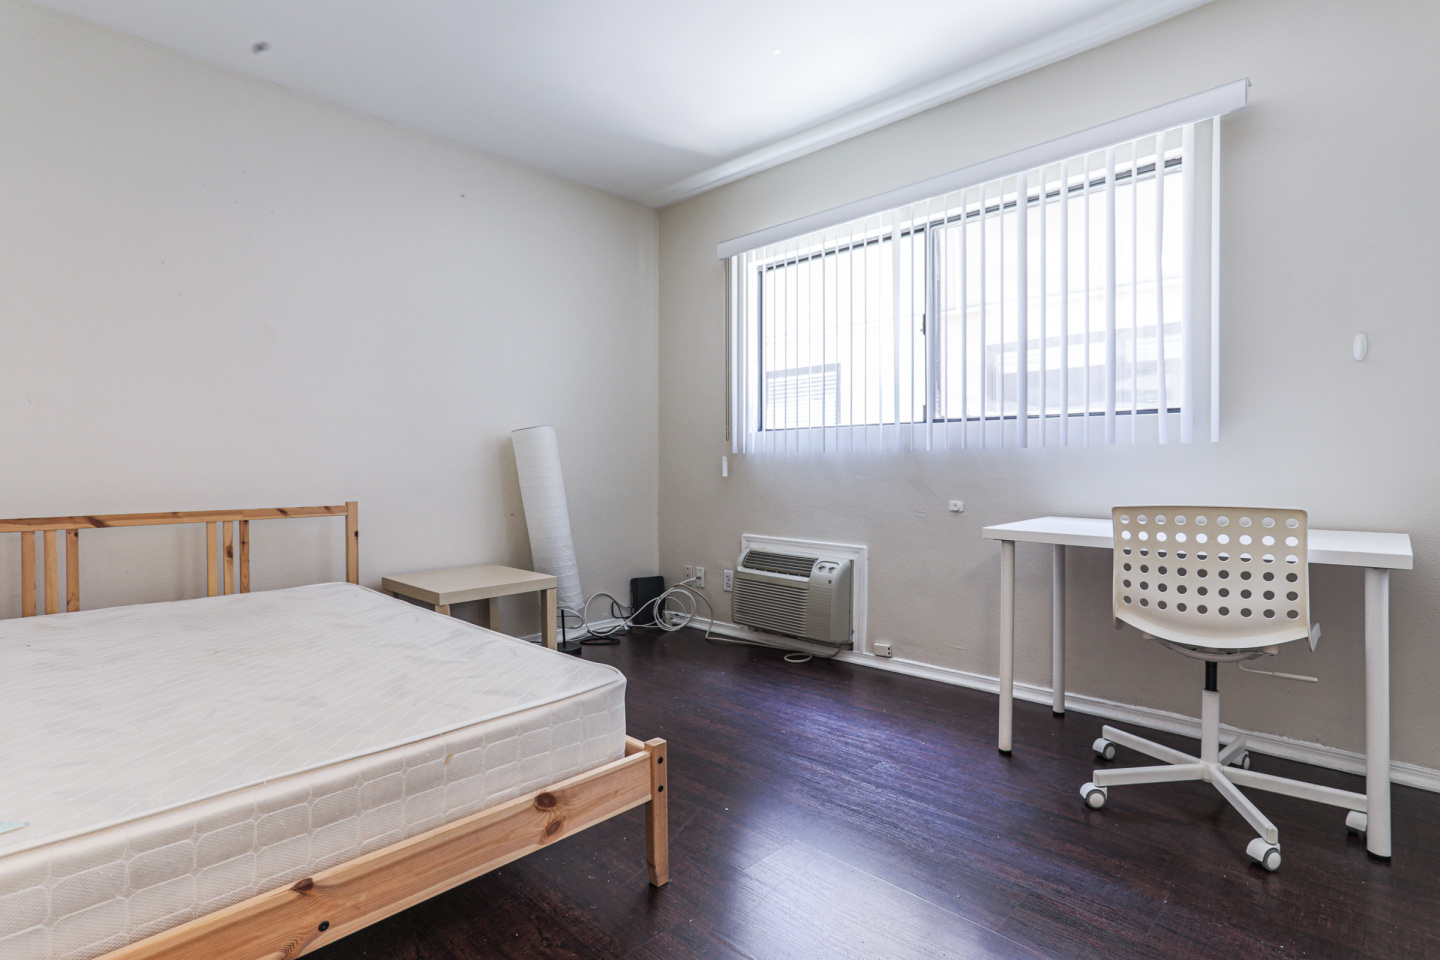 Tripalink Property. bright bedroom furnished with desk and bed, USC student housing